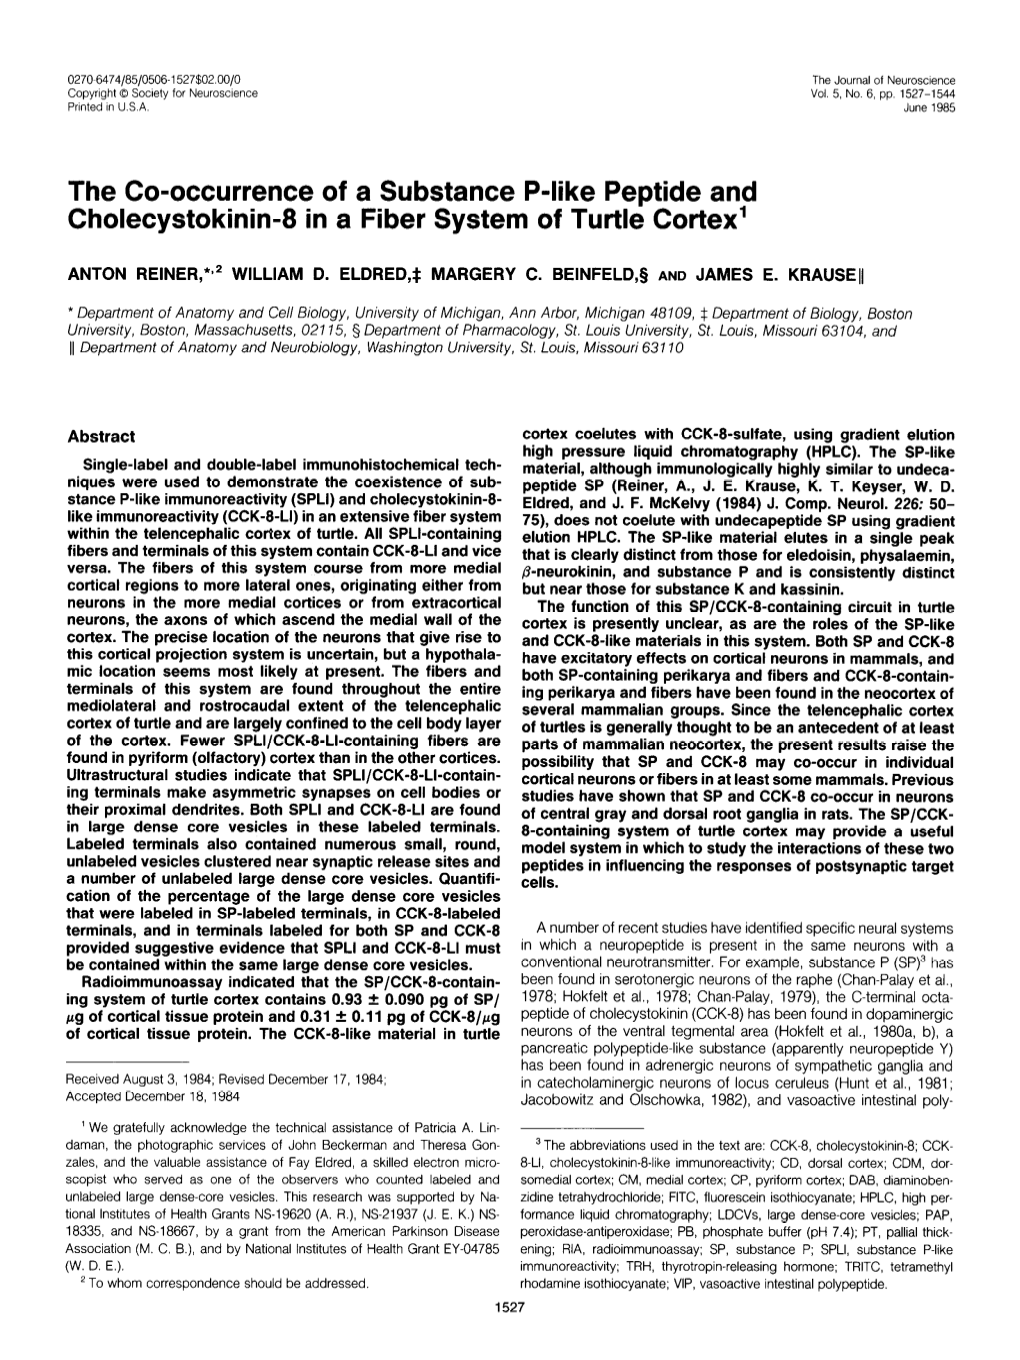 The Co-Occurrence of a Substance P-Like Peptide and Cholecystokinin-8 in a Fiber System of Turtle Cortex’